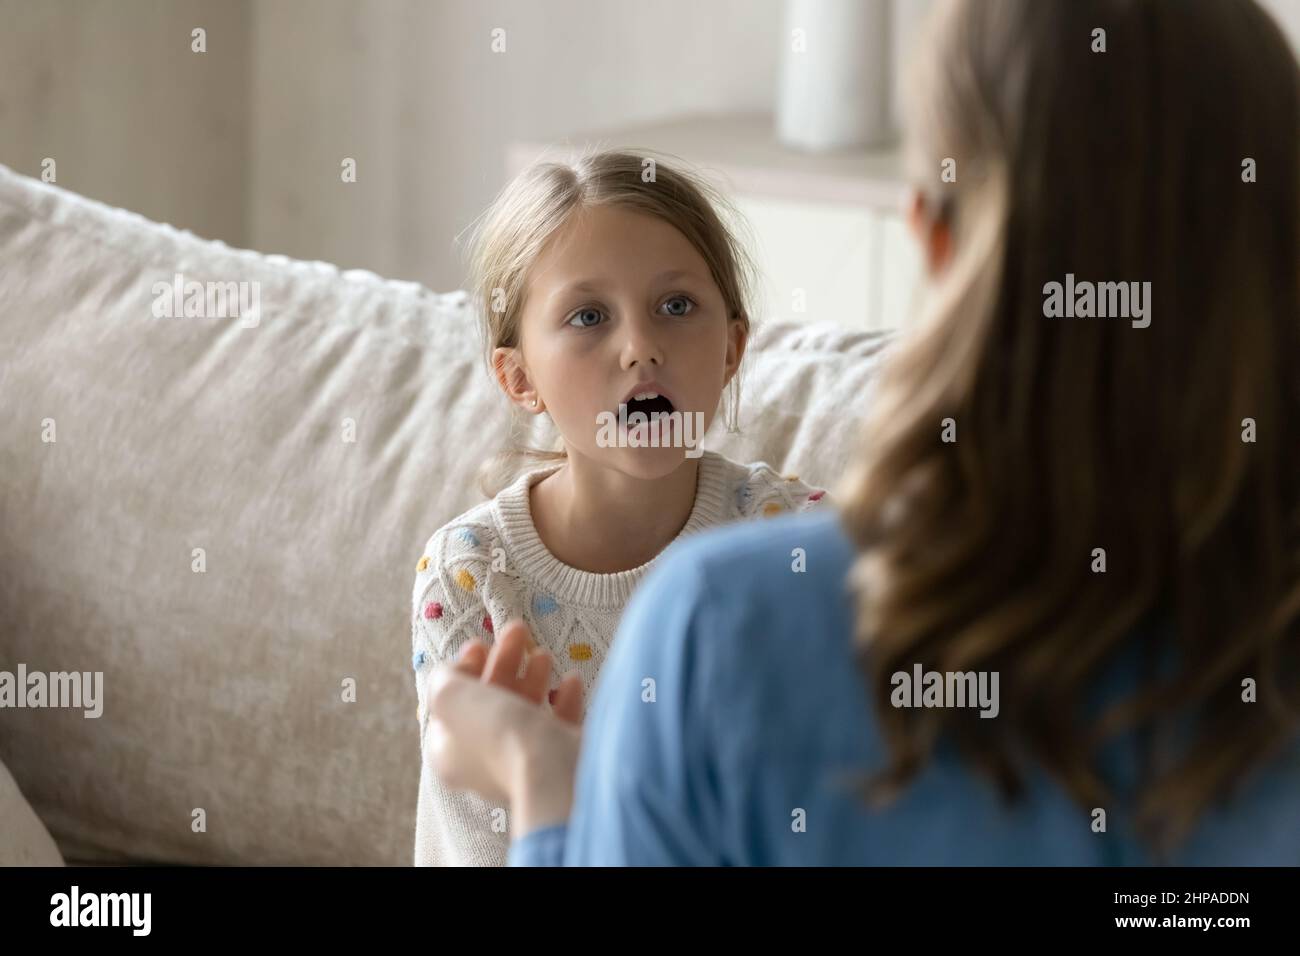 Speech therapist helping kid with pronunciation problems, Stock Photo